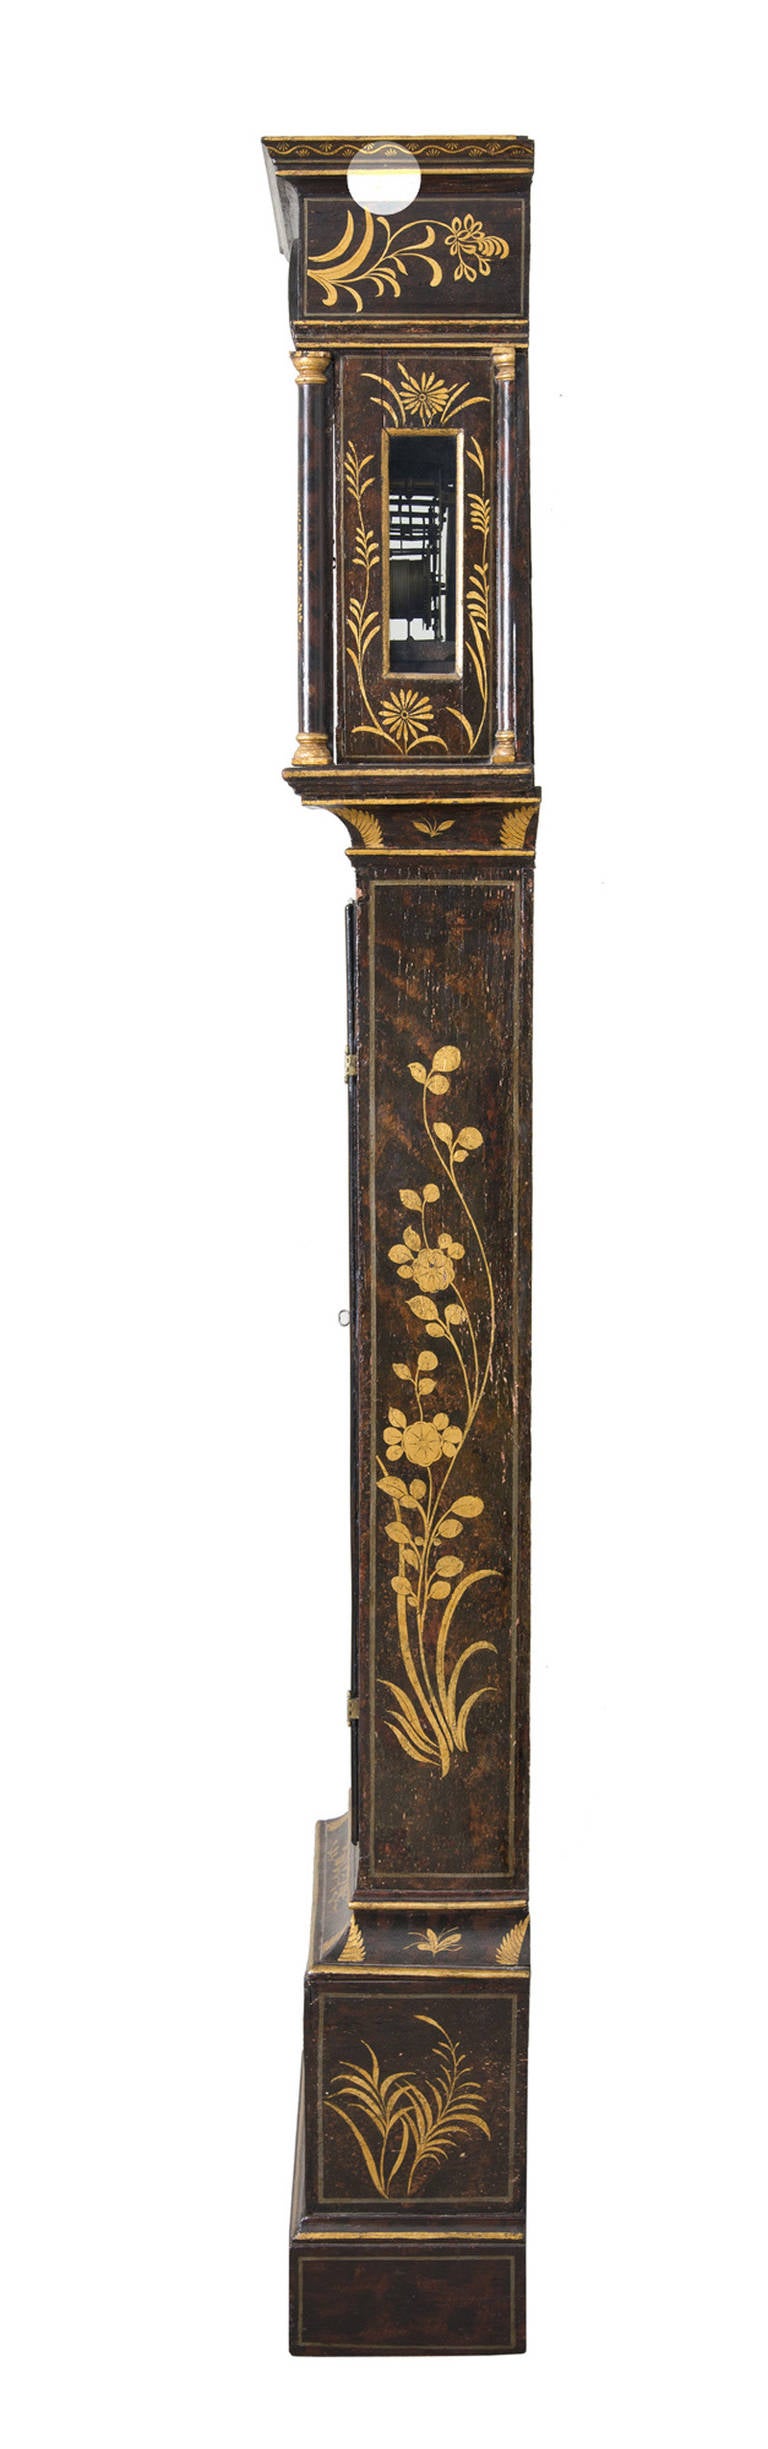 George III 18th Century Lacquered Tall Case Clock